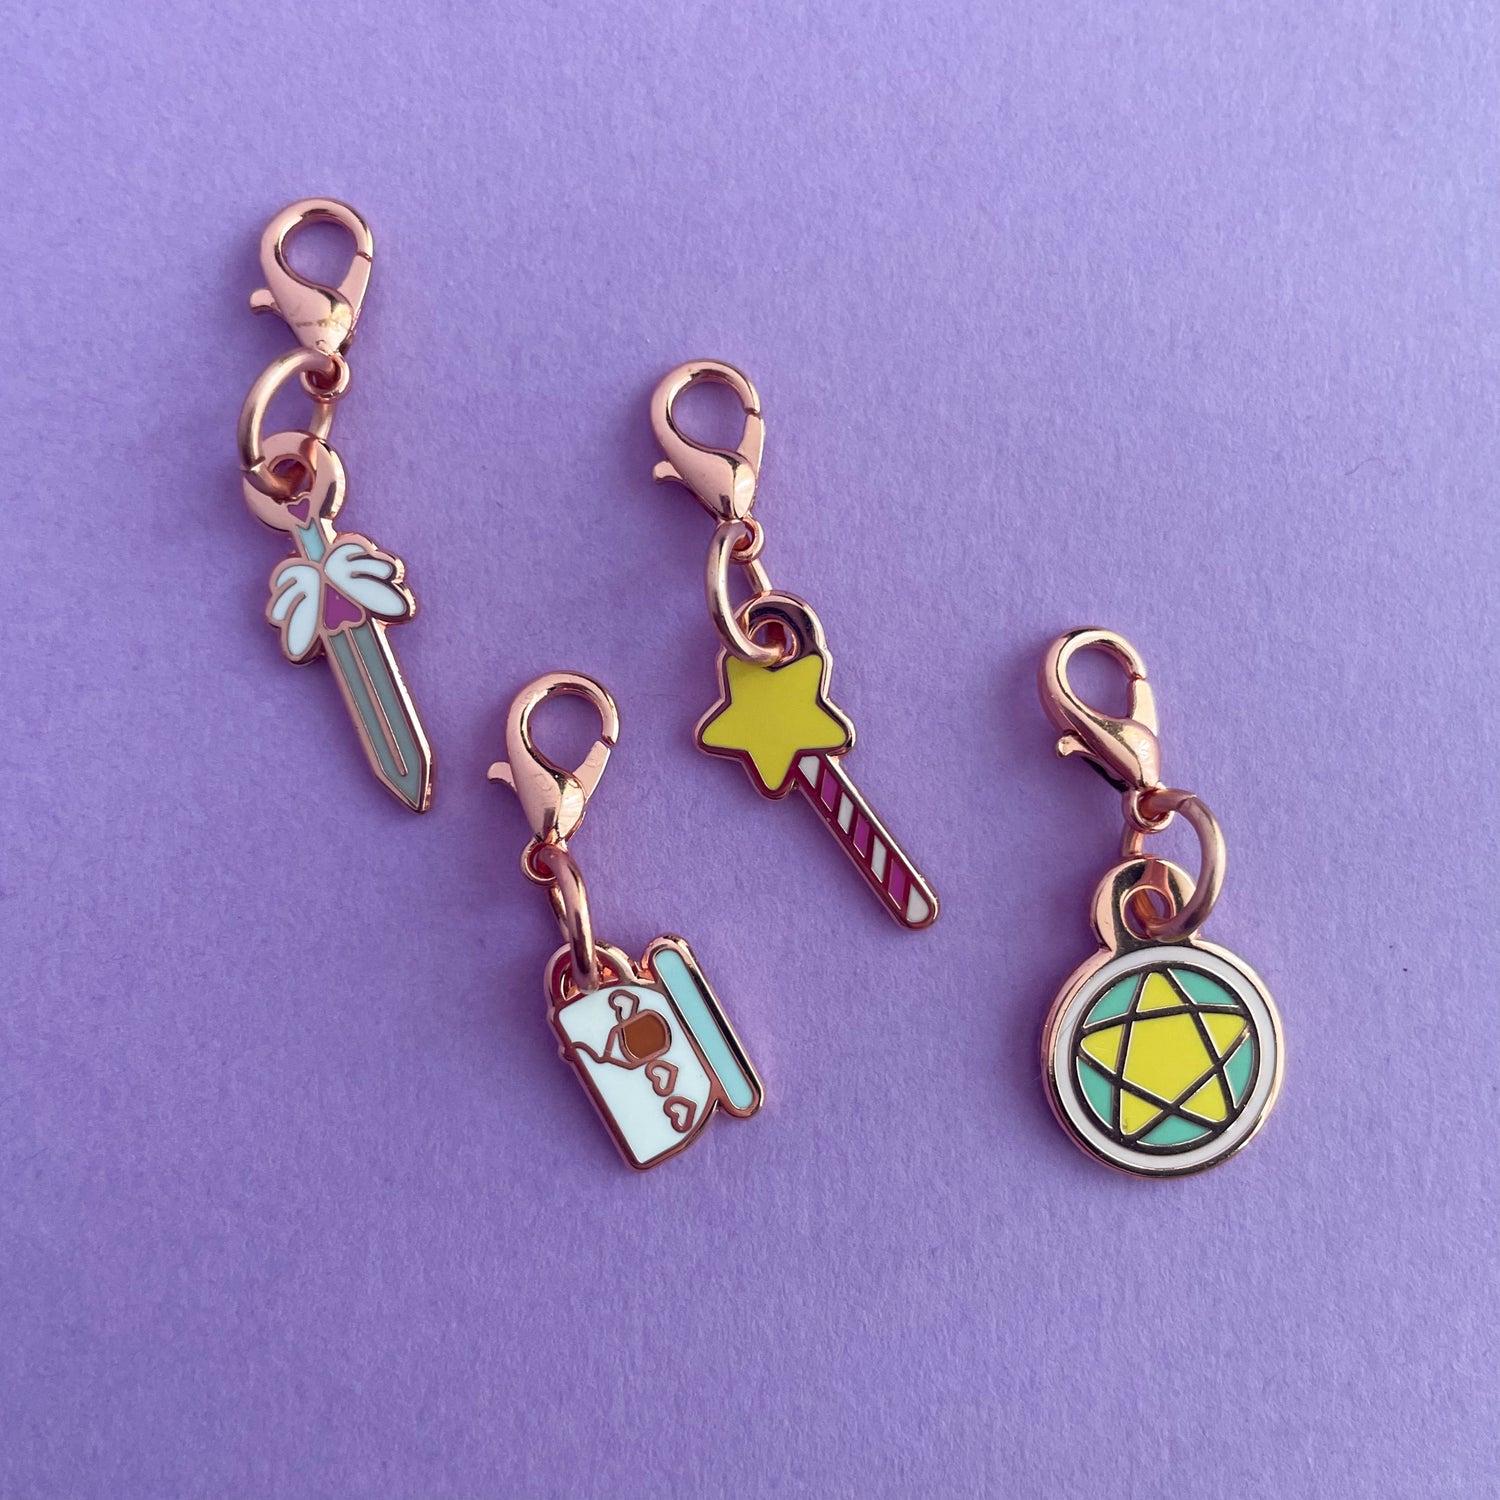 A collection of charms on a purple background. The charms are shaped like a sword, a teacup, a wand, and a pentacle circle.